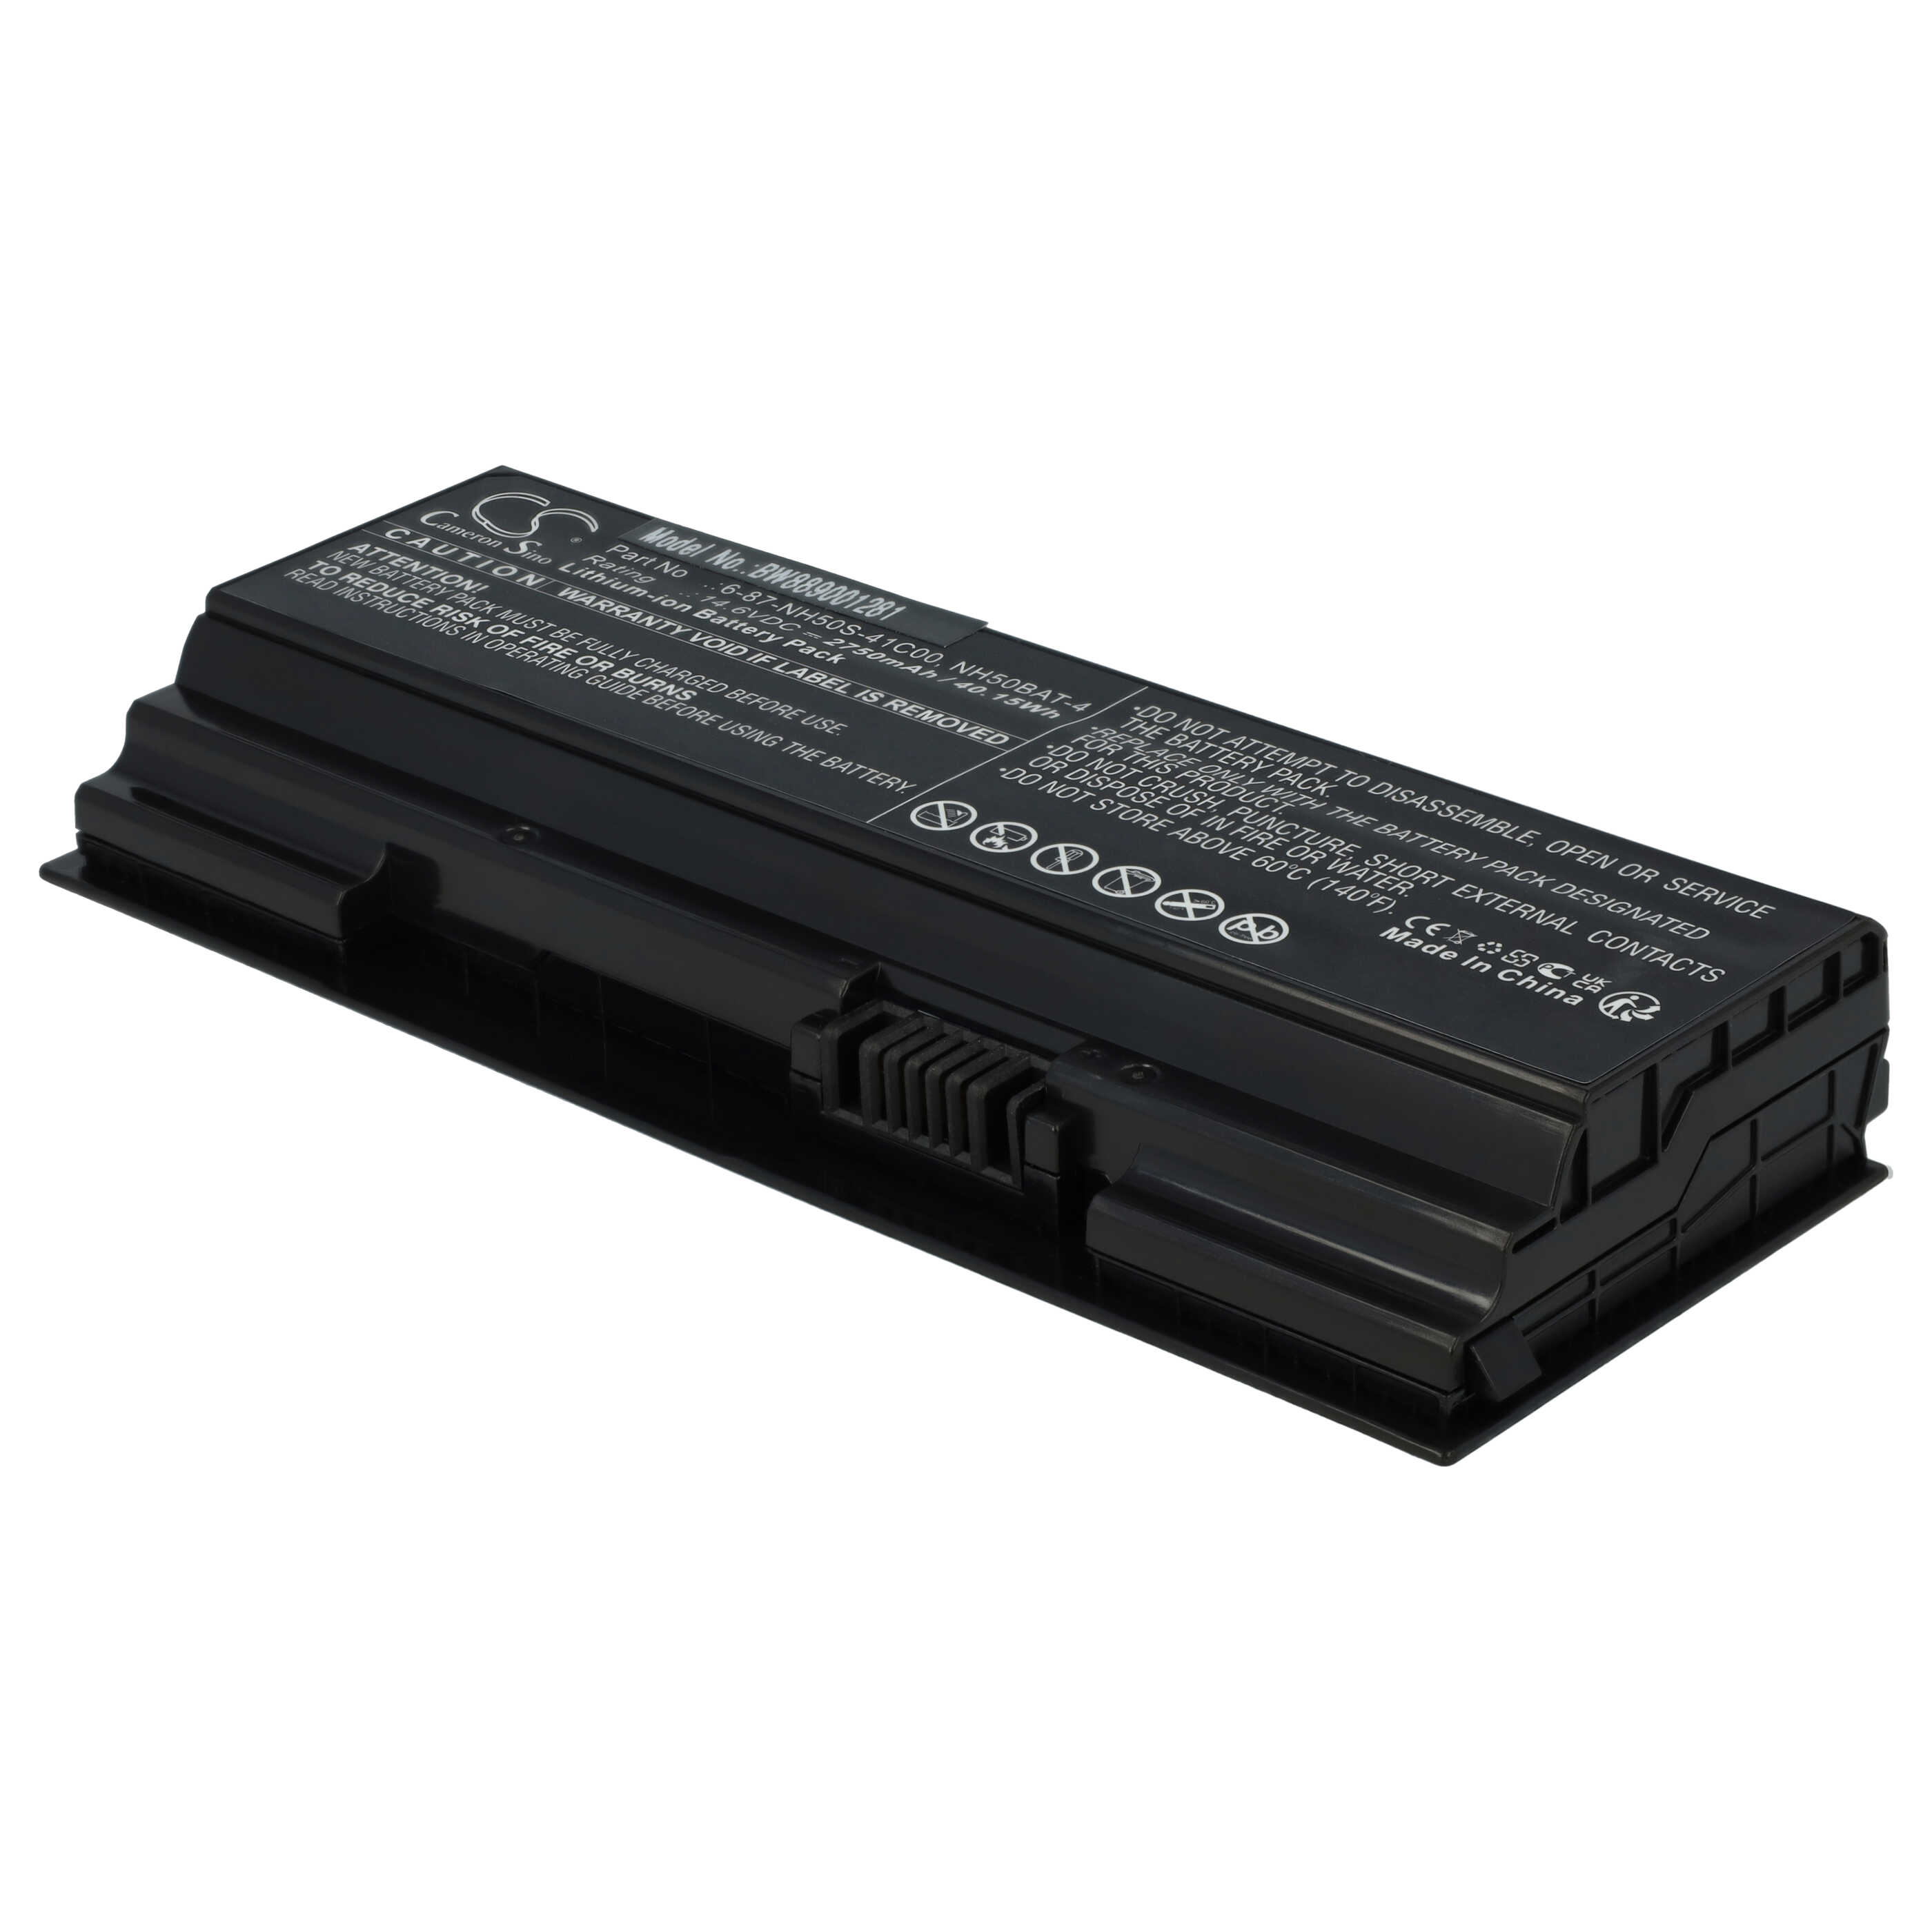 Notebook Battery Replacement for Clevo NH50BAT-4, 6-87-NH50S-41C00 - 2750mAh 14.6V Li-Ion